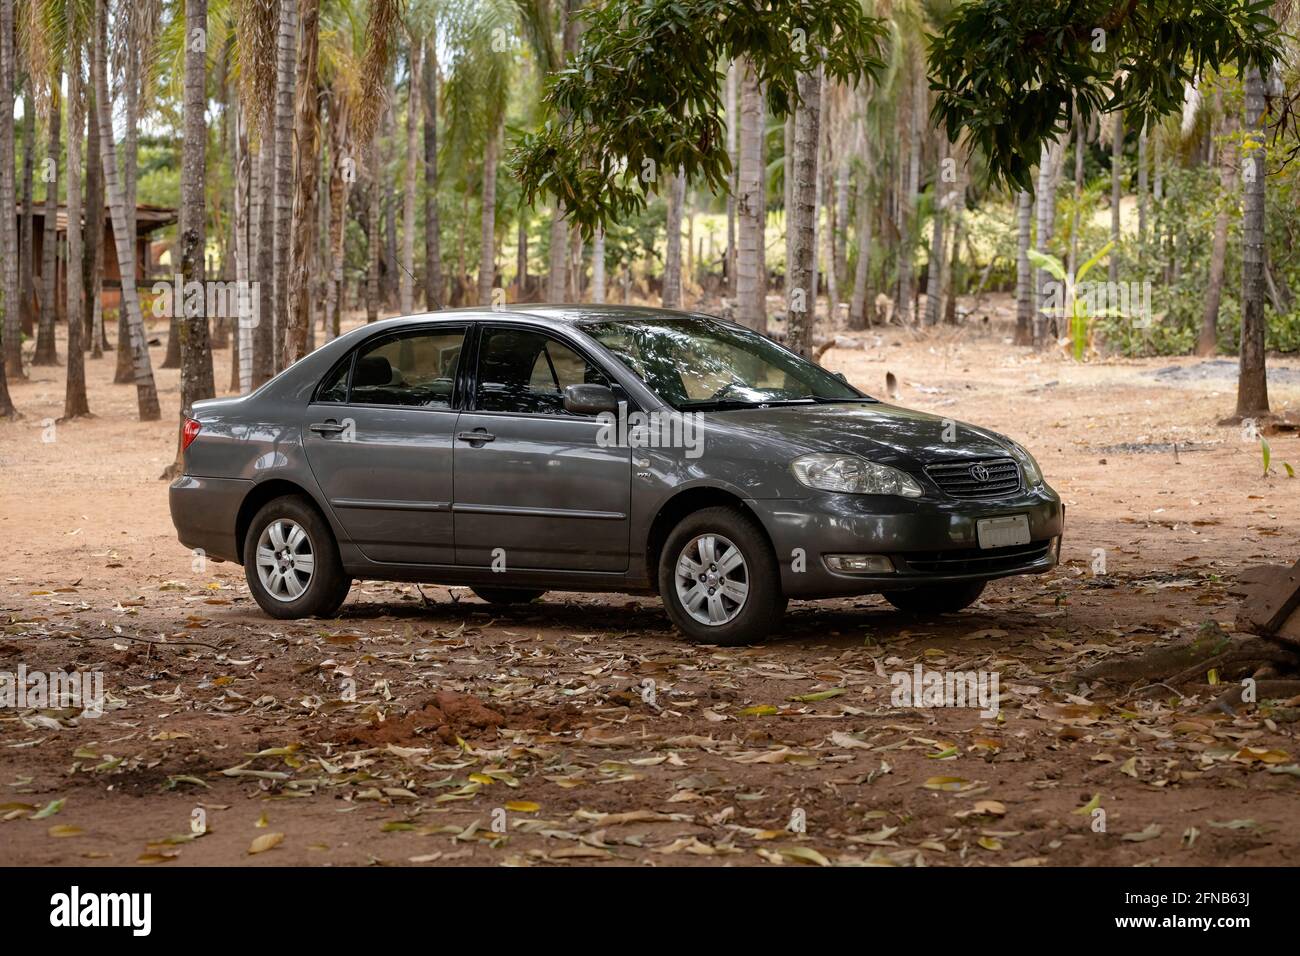 Page 2 - Toyota Corolla High Resolution Stock Photography And Images - Alamy